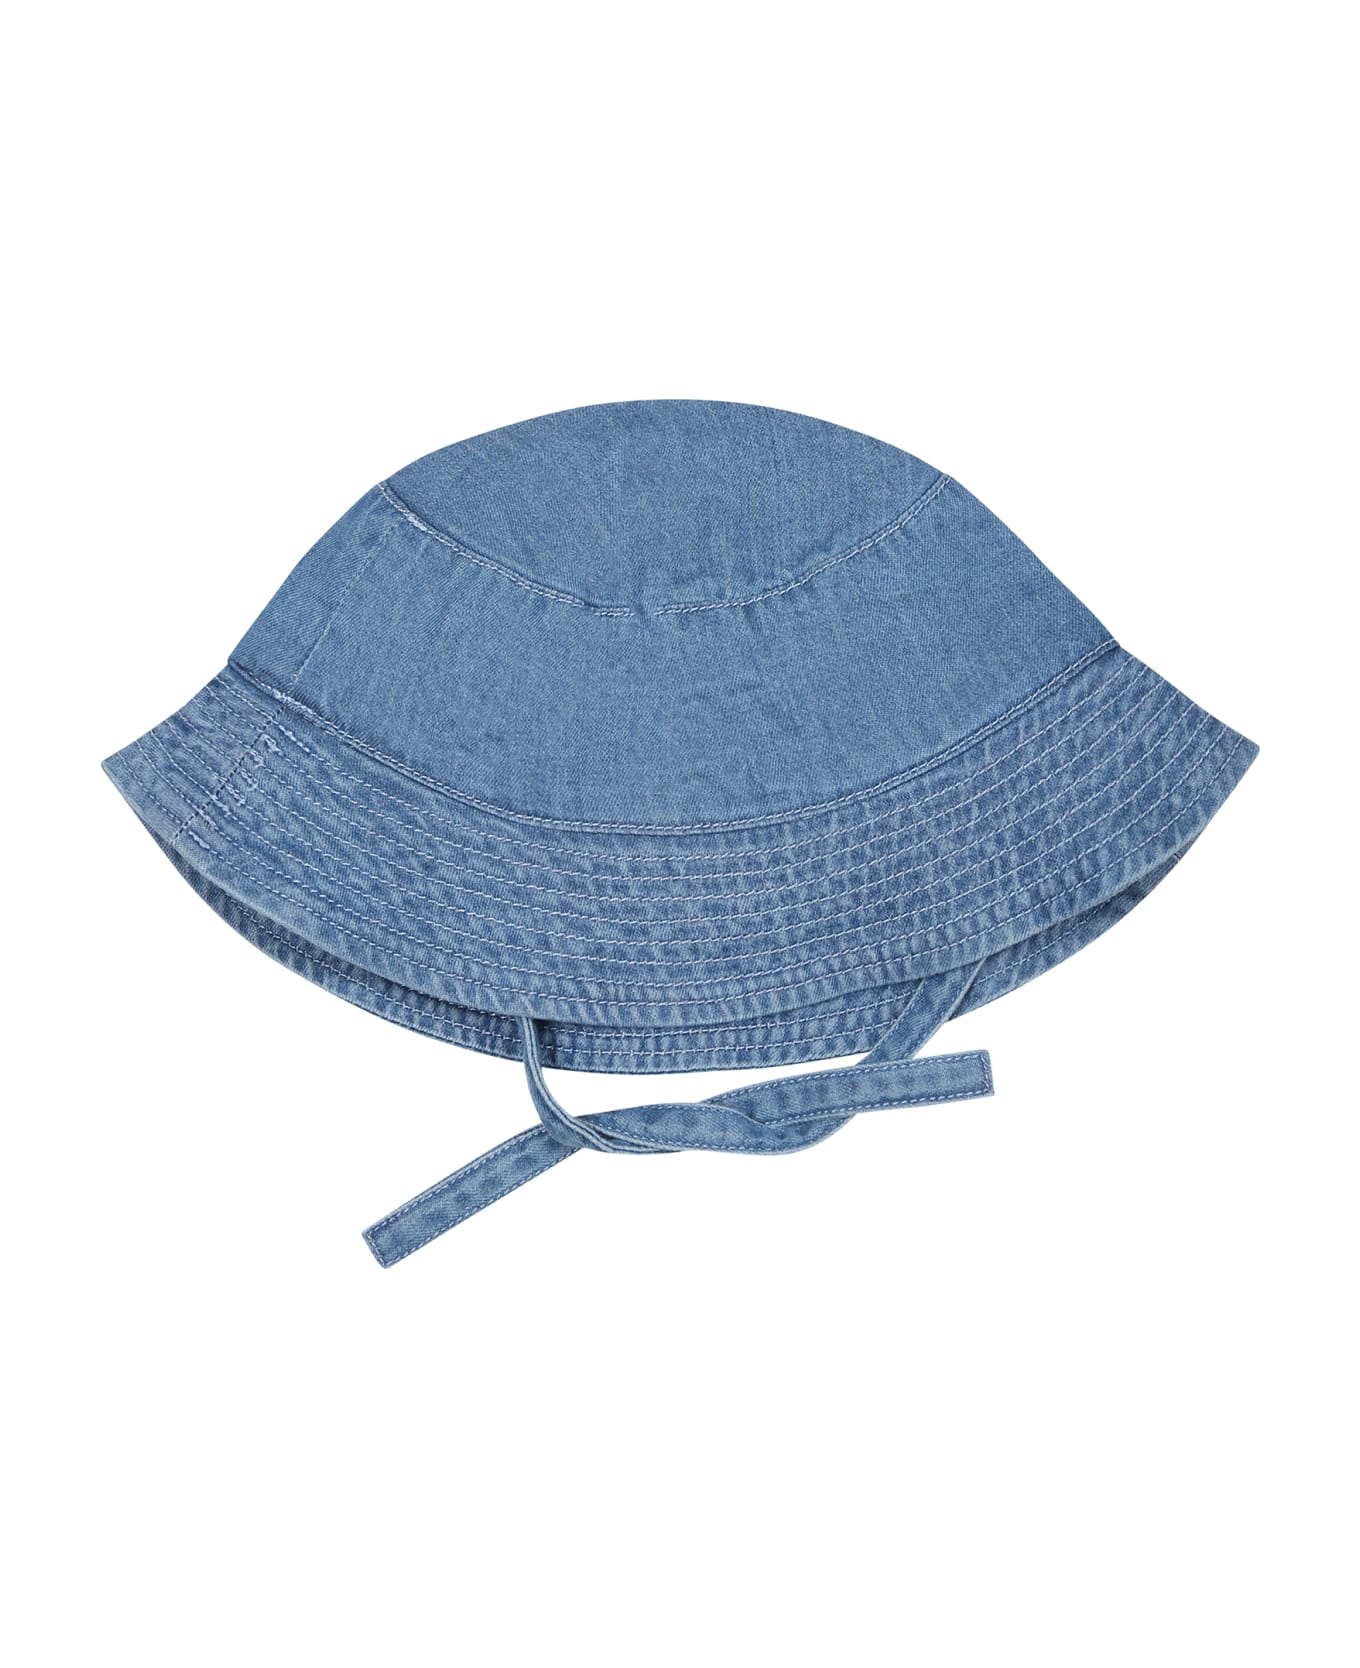 Petit Bateau Blue Cloche For Baby Girl With Logo - Denim アクセサリー＆ギフト